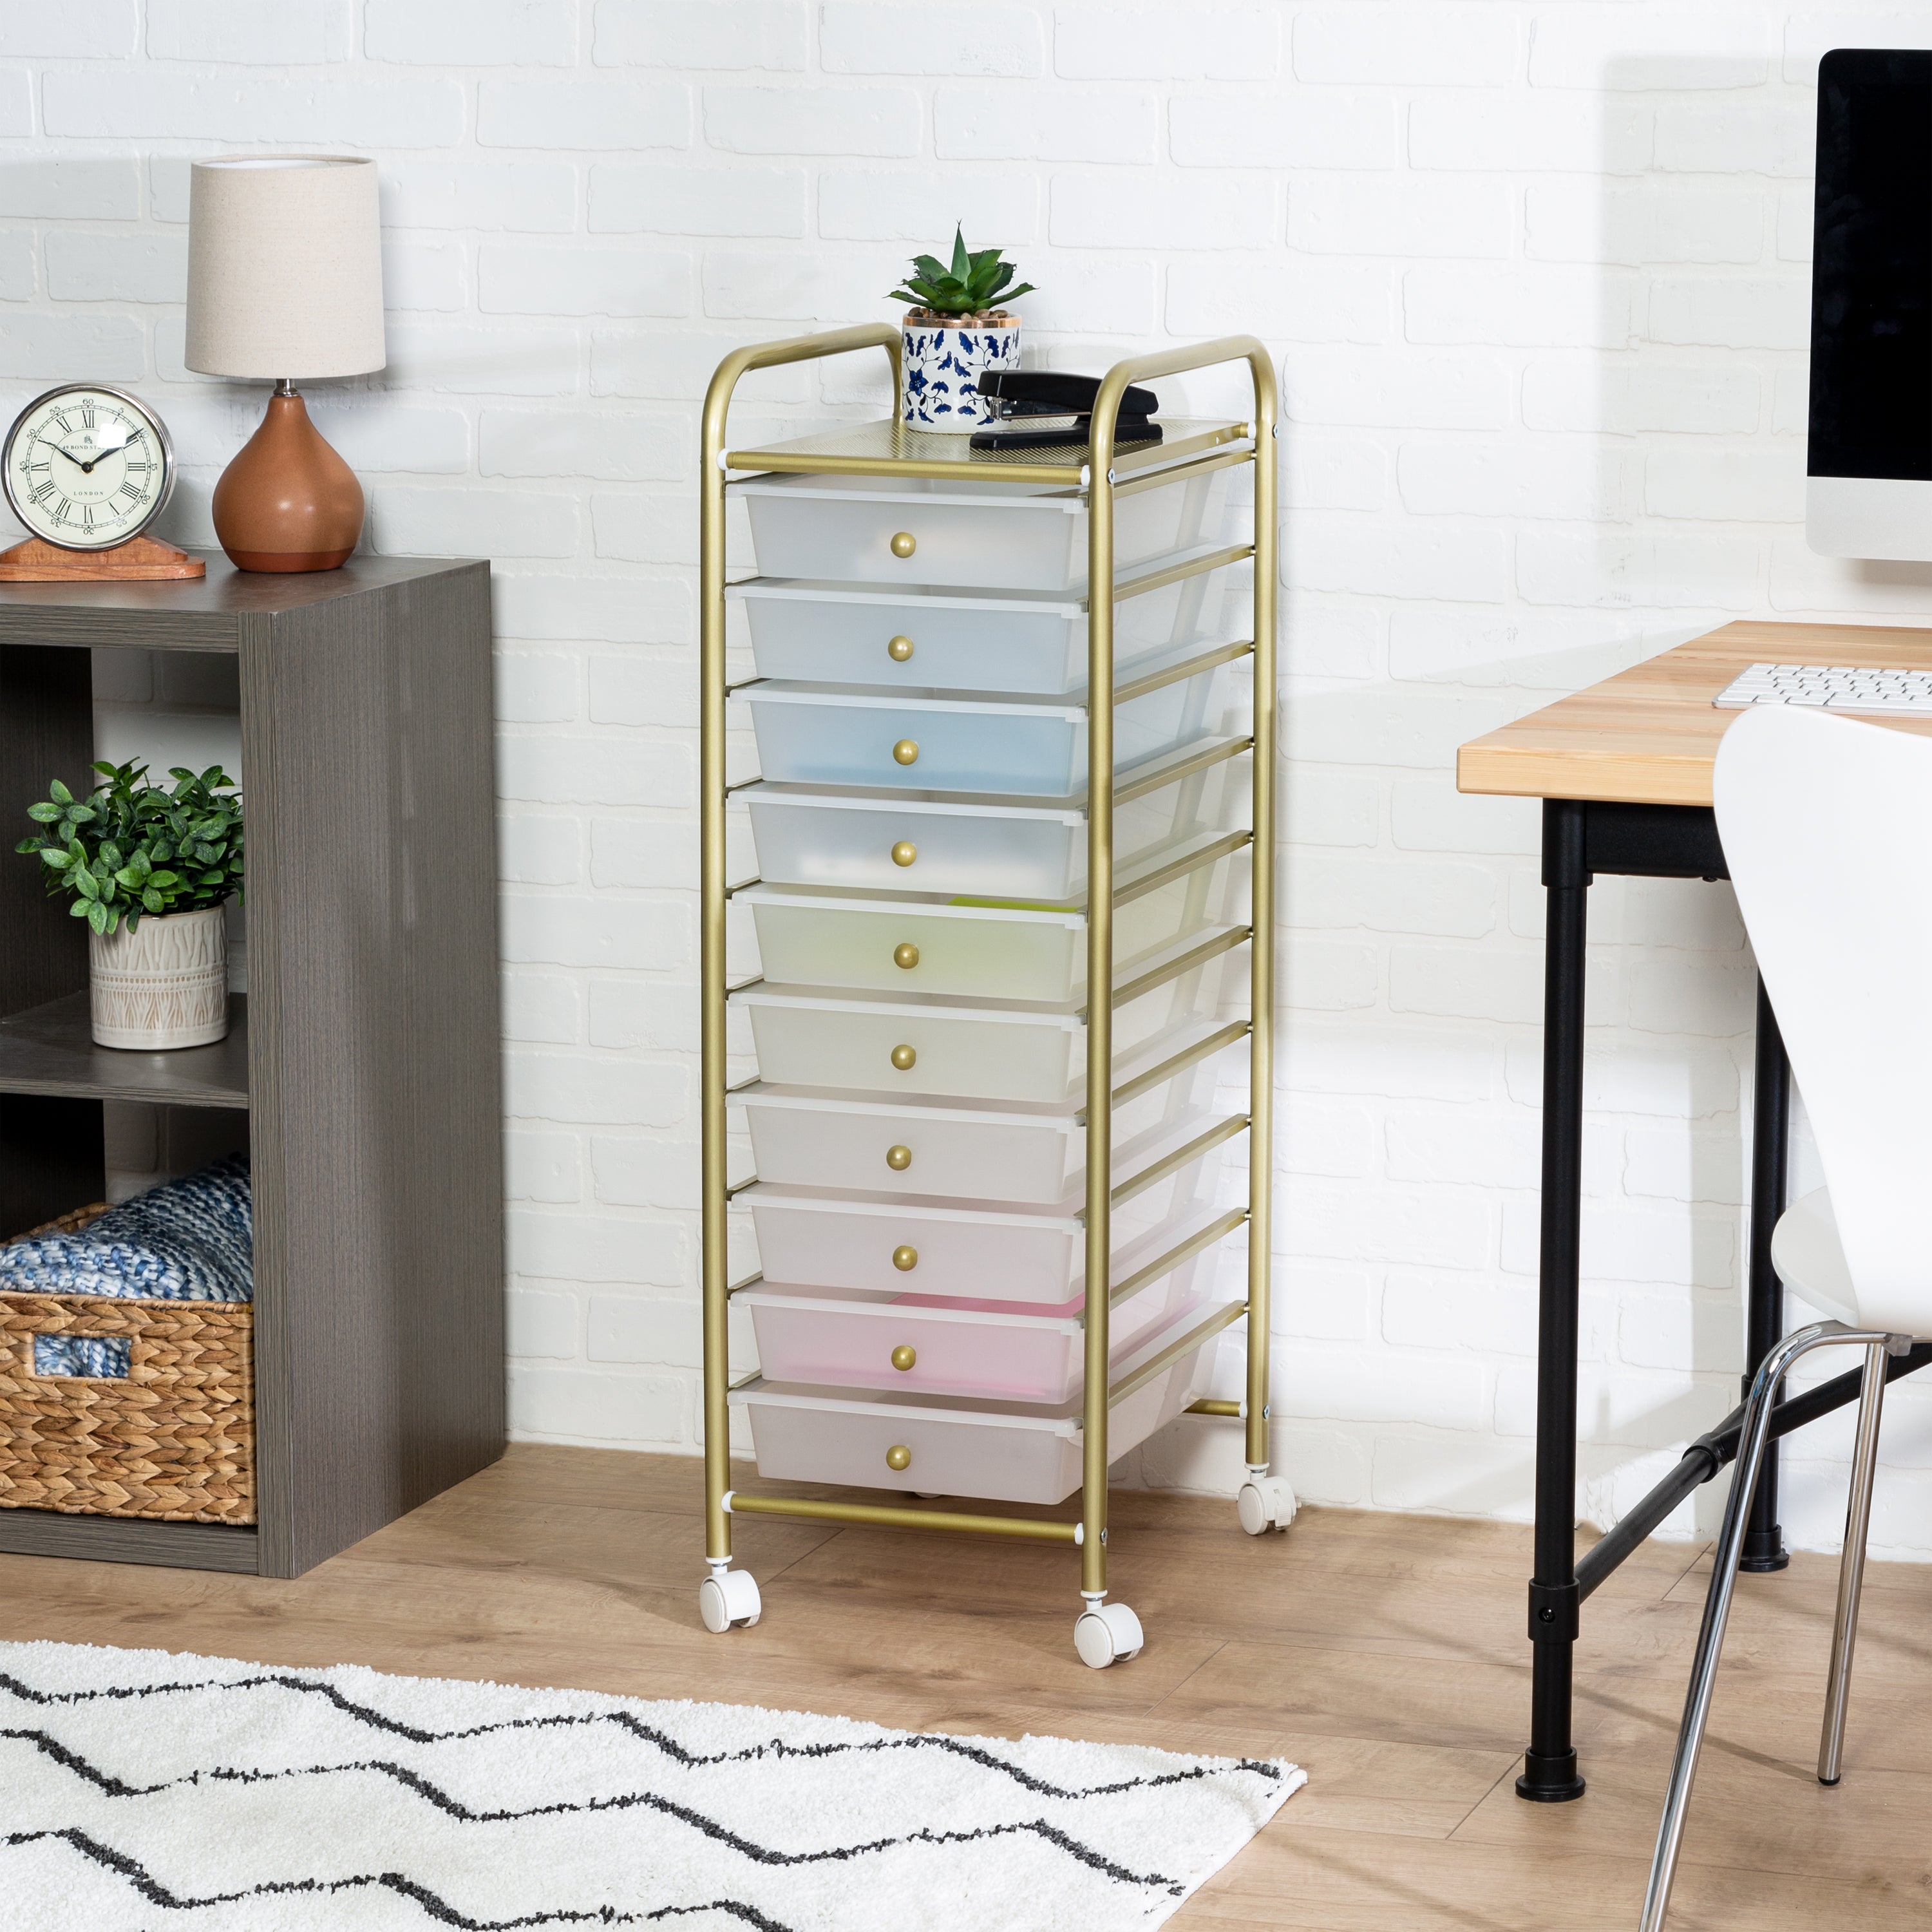 Honey Can Do 10-Drawer Gold Rolling Storage Cart